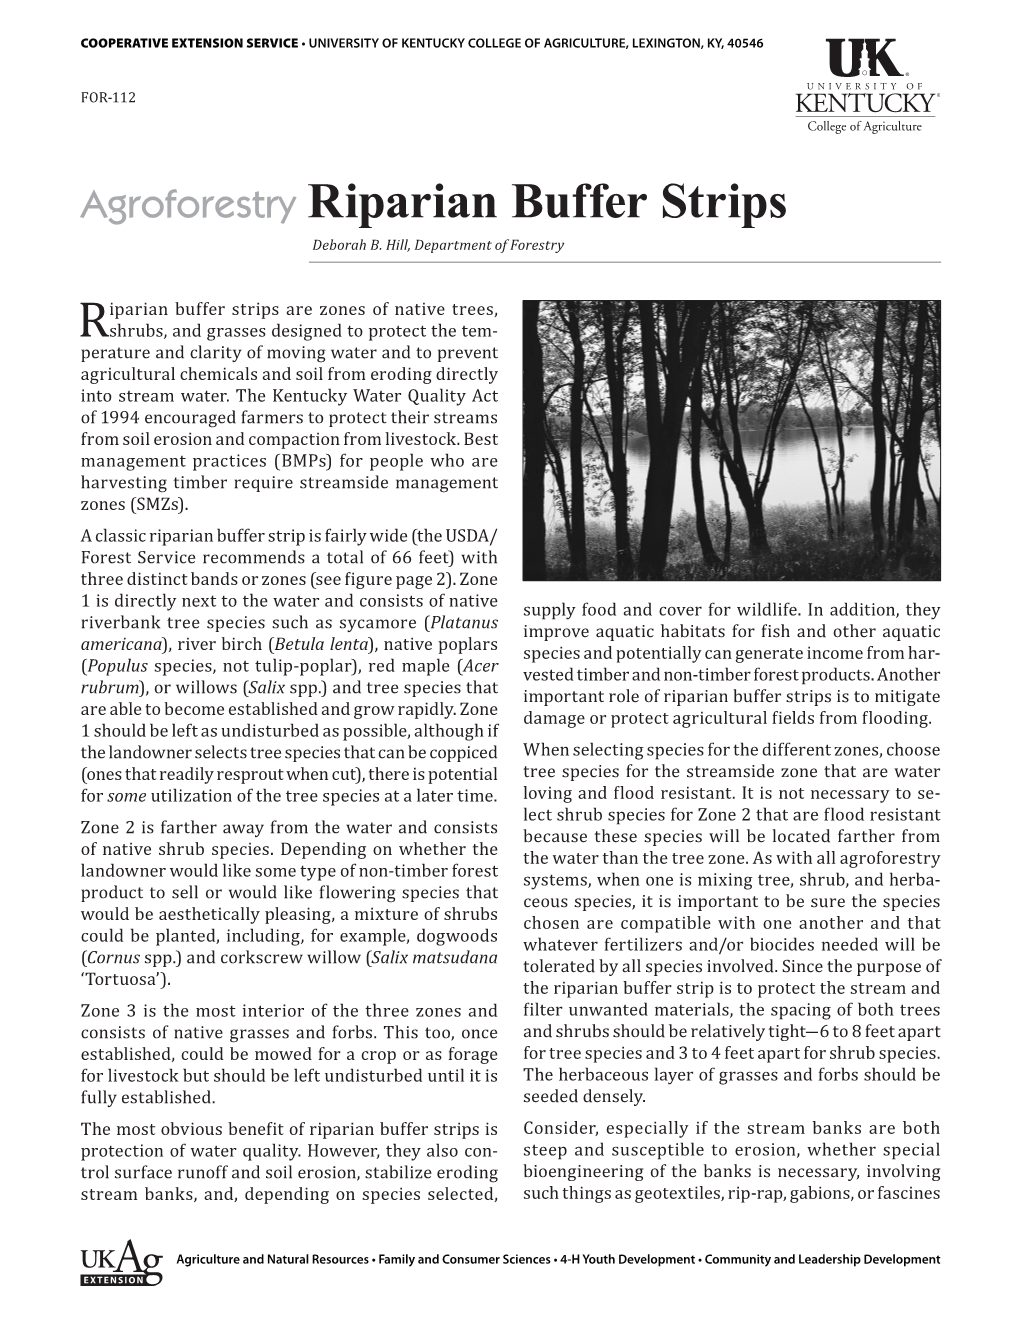 Riparian Buffer Strips Are Zones of Native Trees